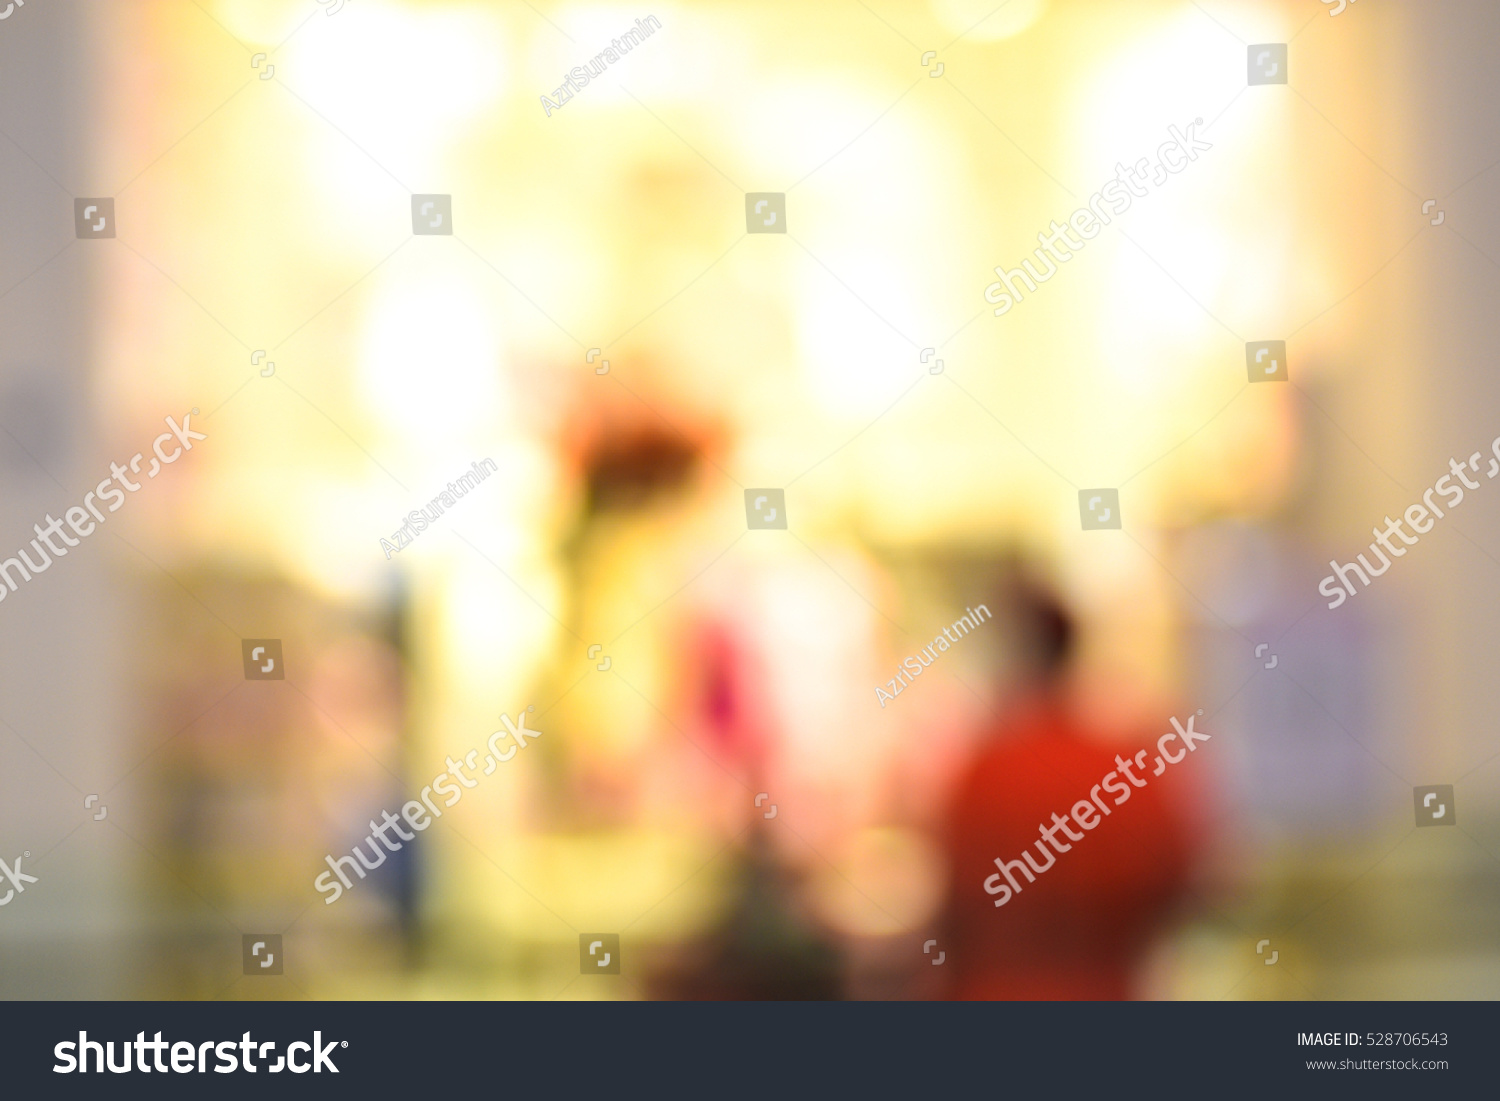 Blurred background of store #528706543